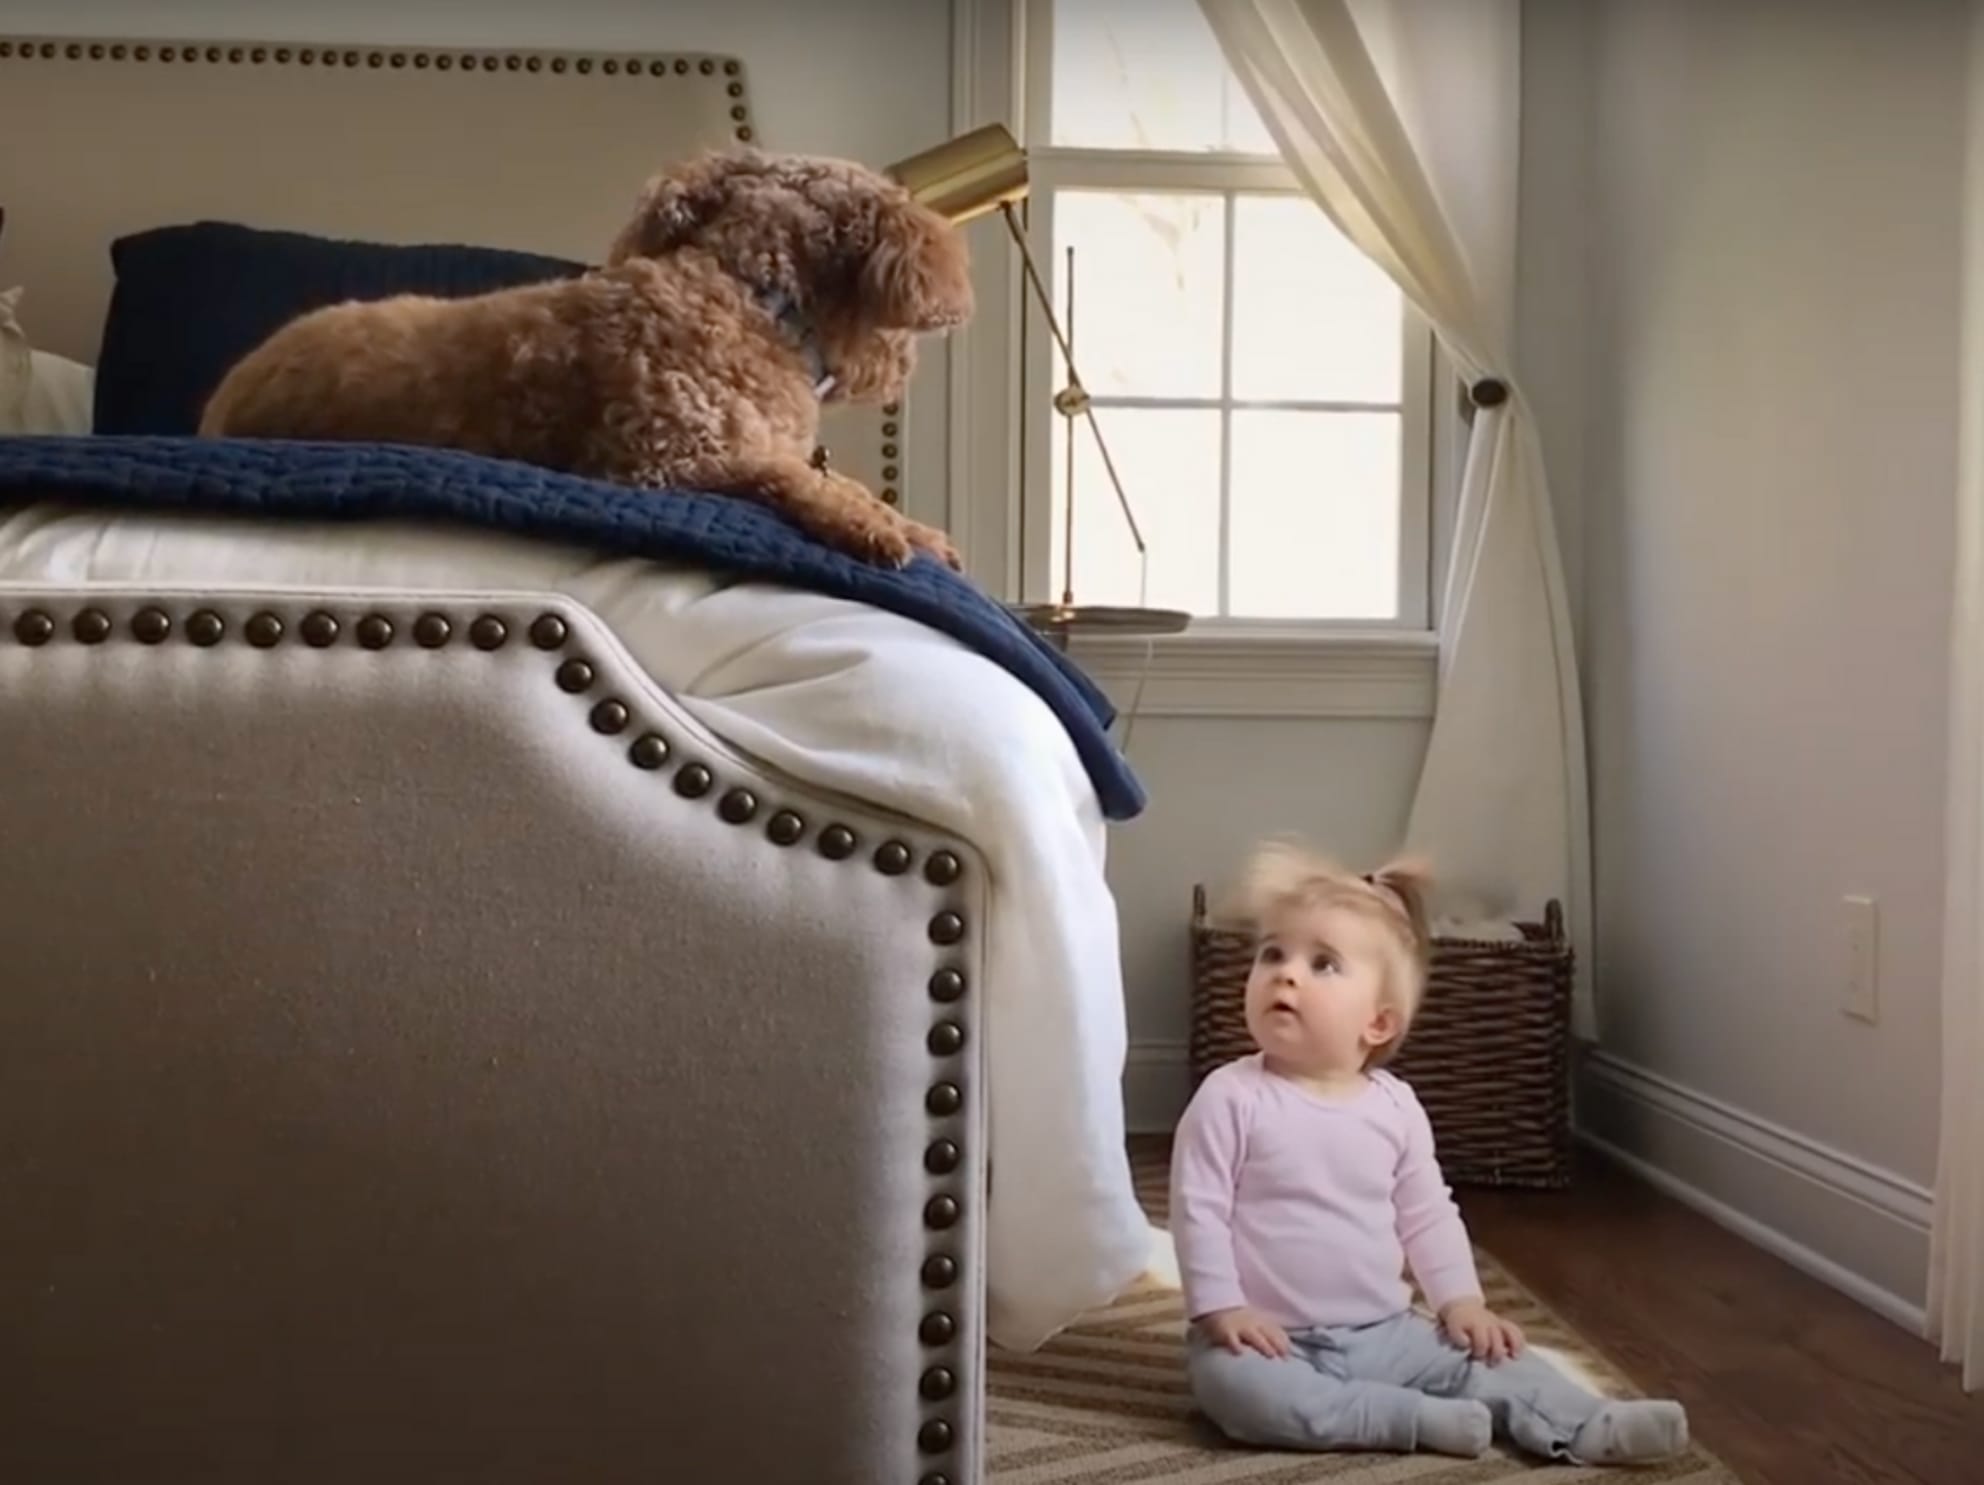 Little girl looking up at dog on bed